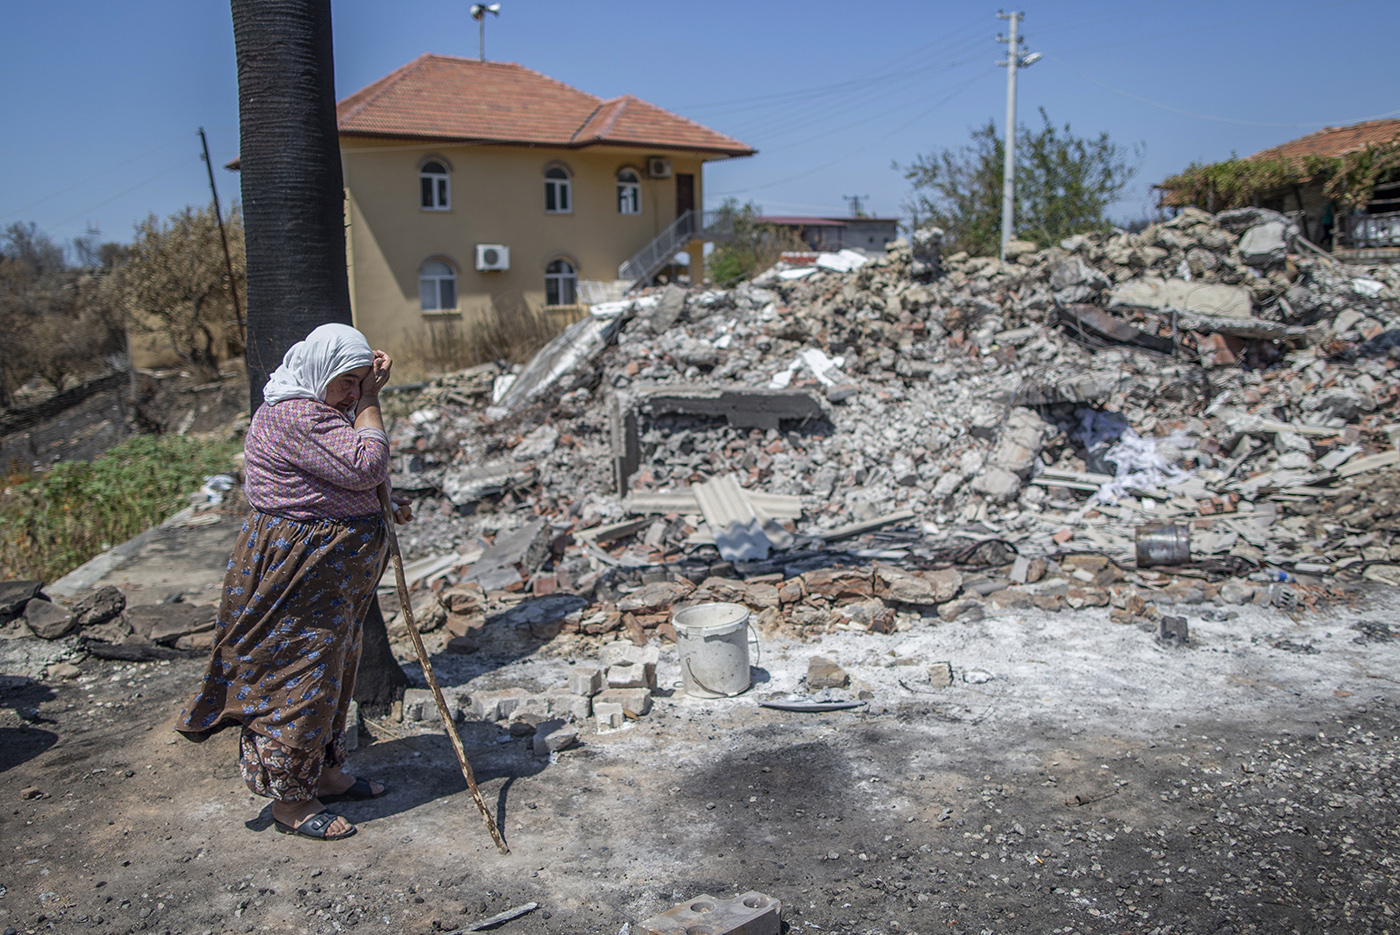 Cemile Gullu, cries in front of the wreckage burned of her house after a wildfire at the Bucak village of the Manavgat district of Antalya, Turkey, 10 August 2021.